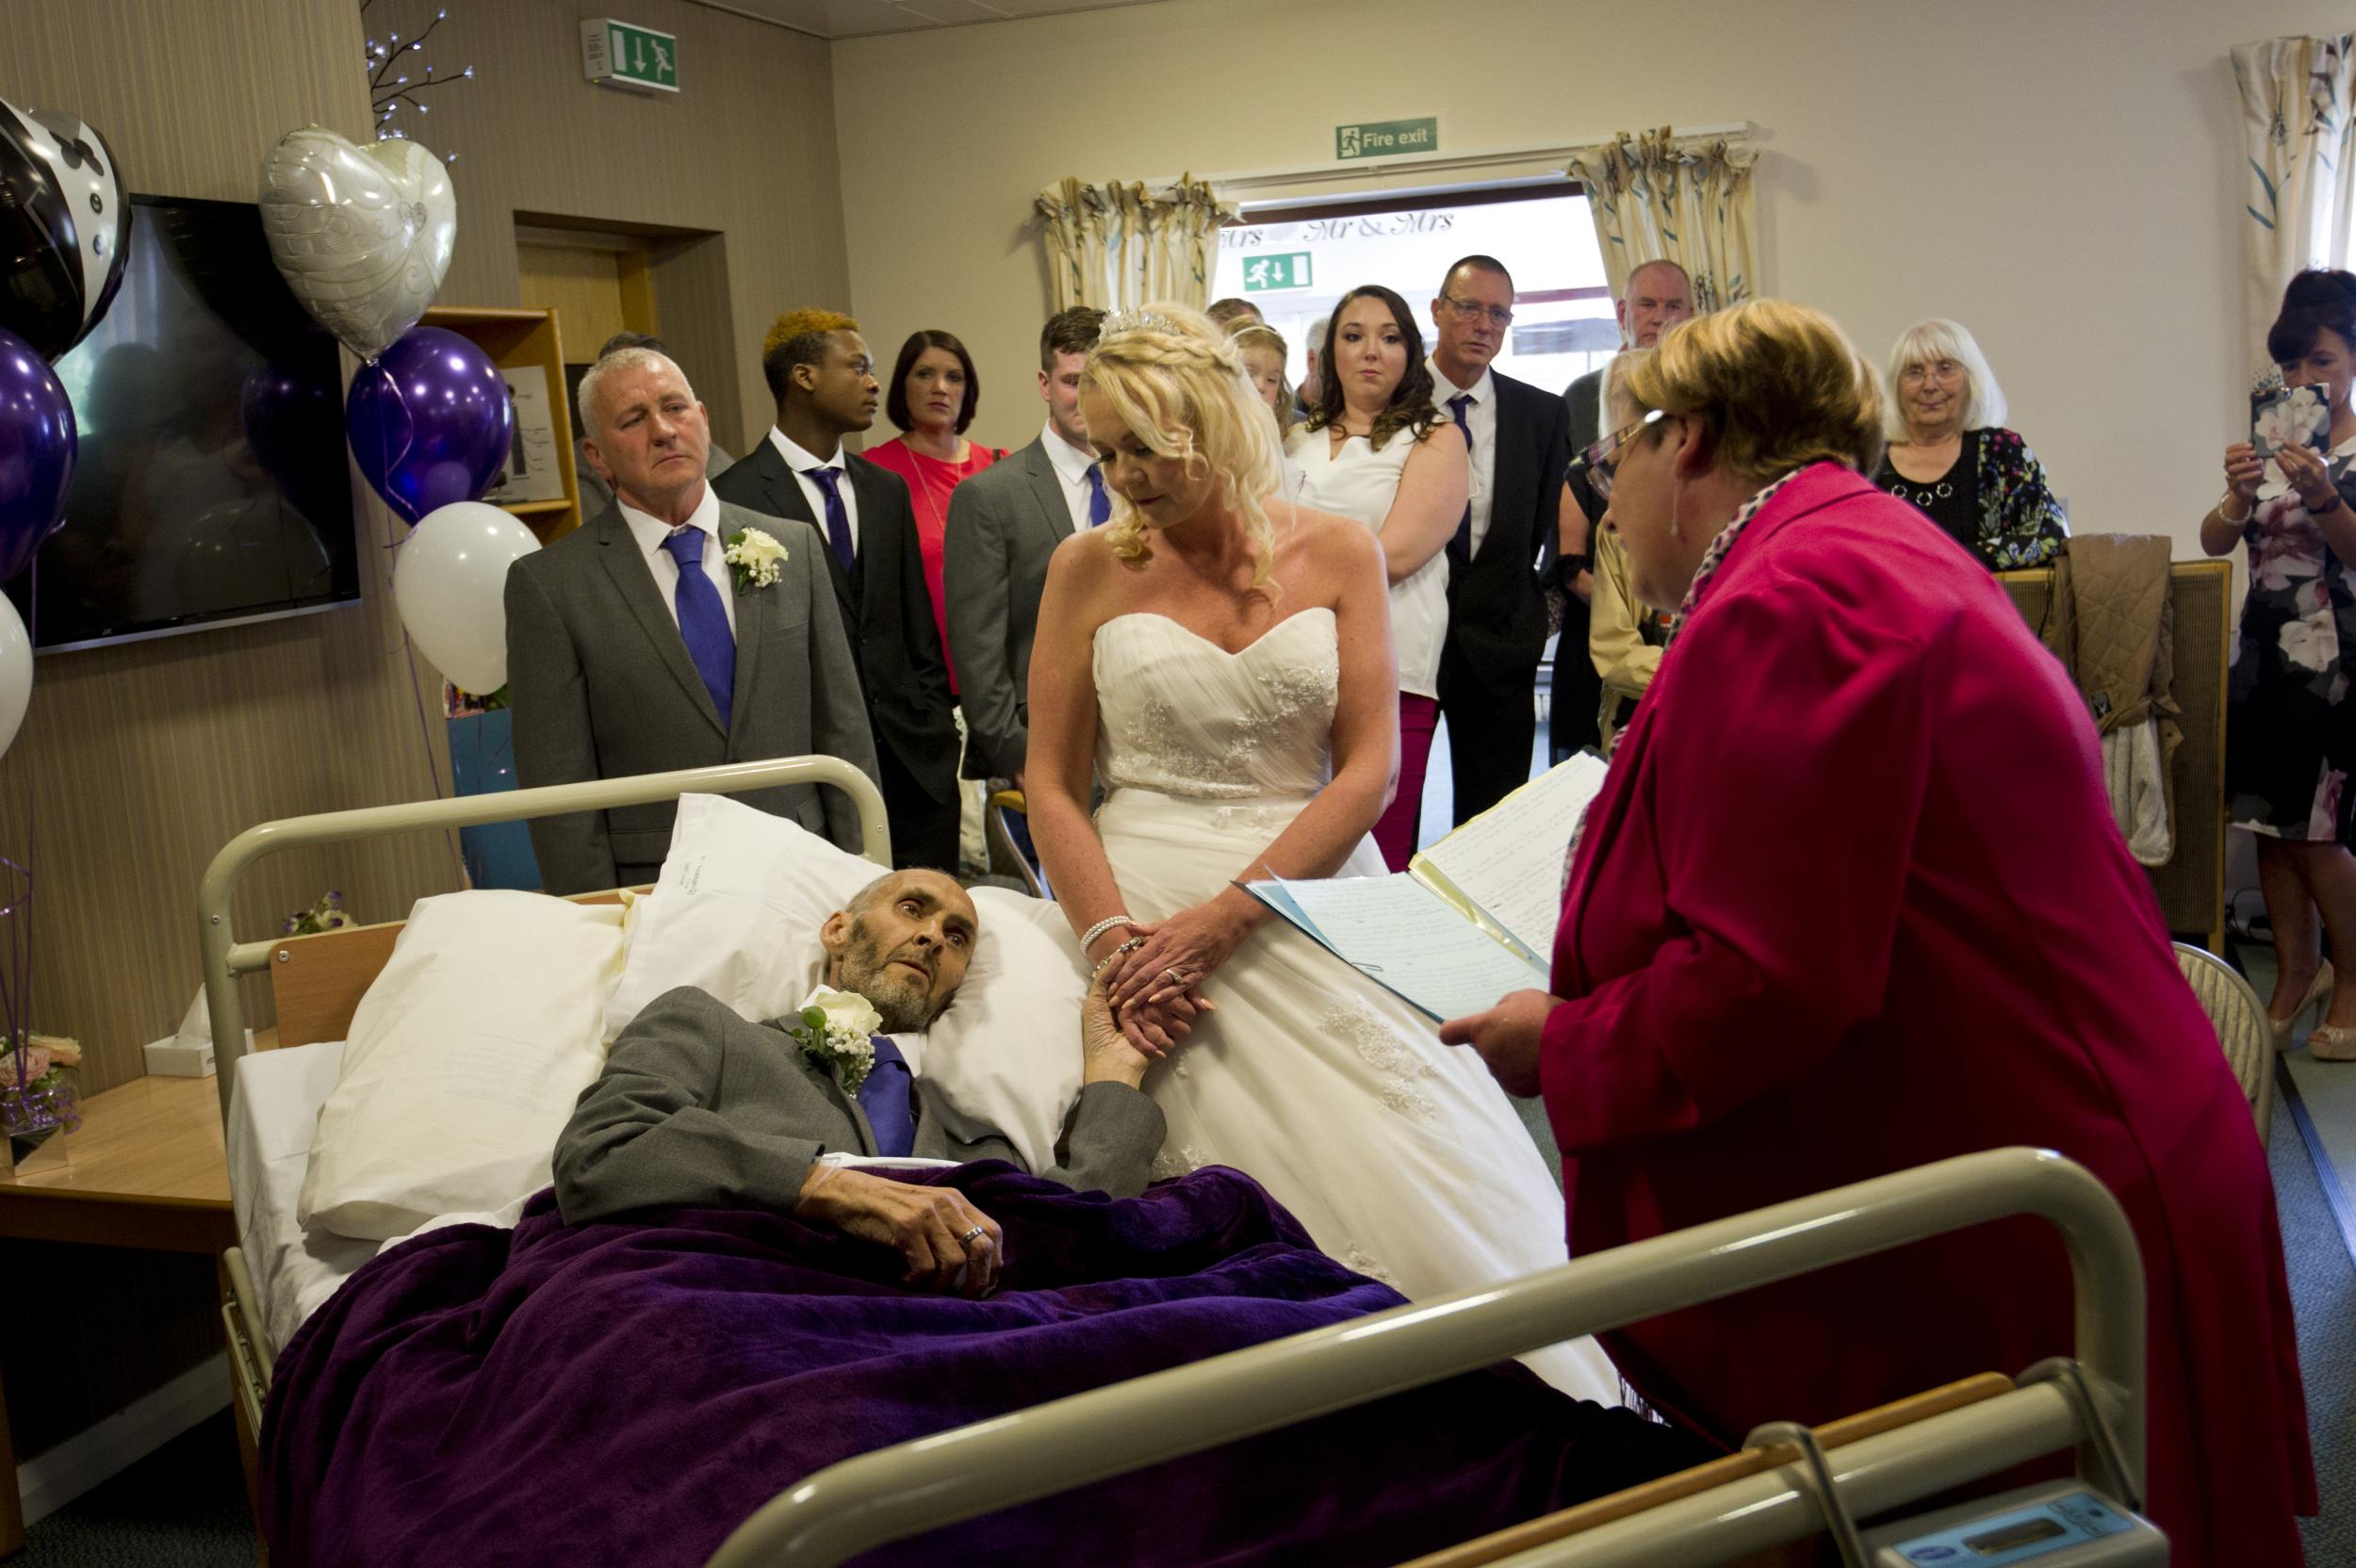 Couple marry in hospice funded by strangers after groom diagnosed with terminal cancer